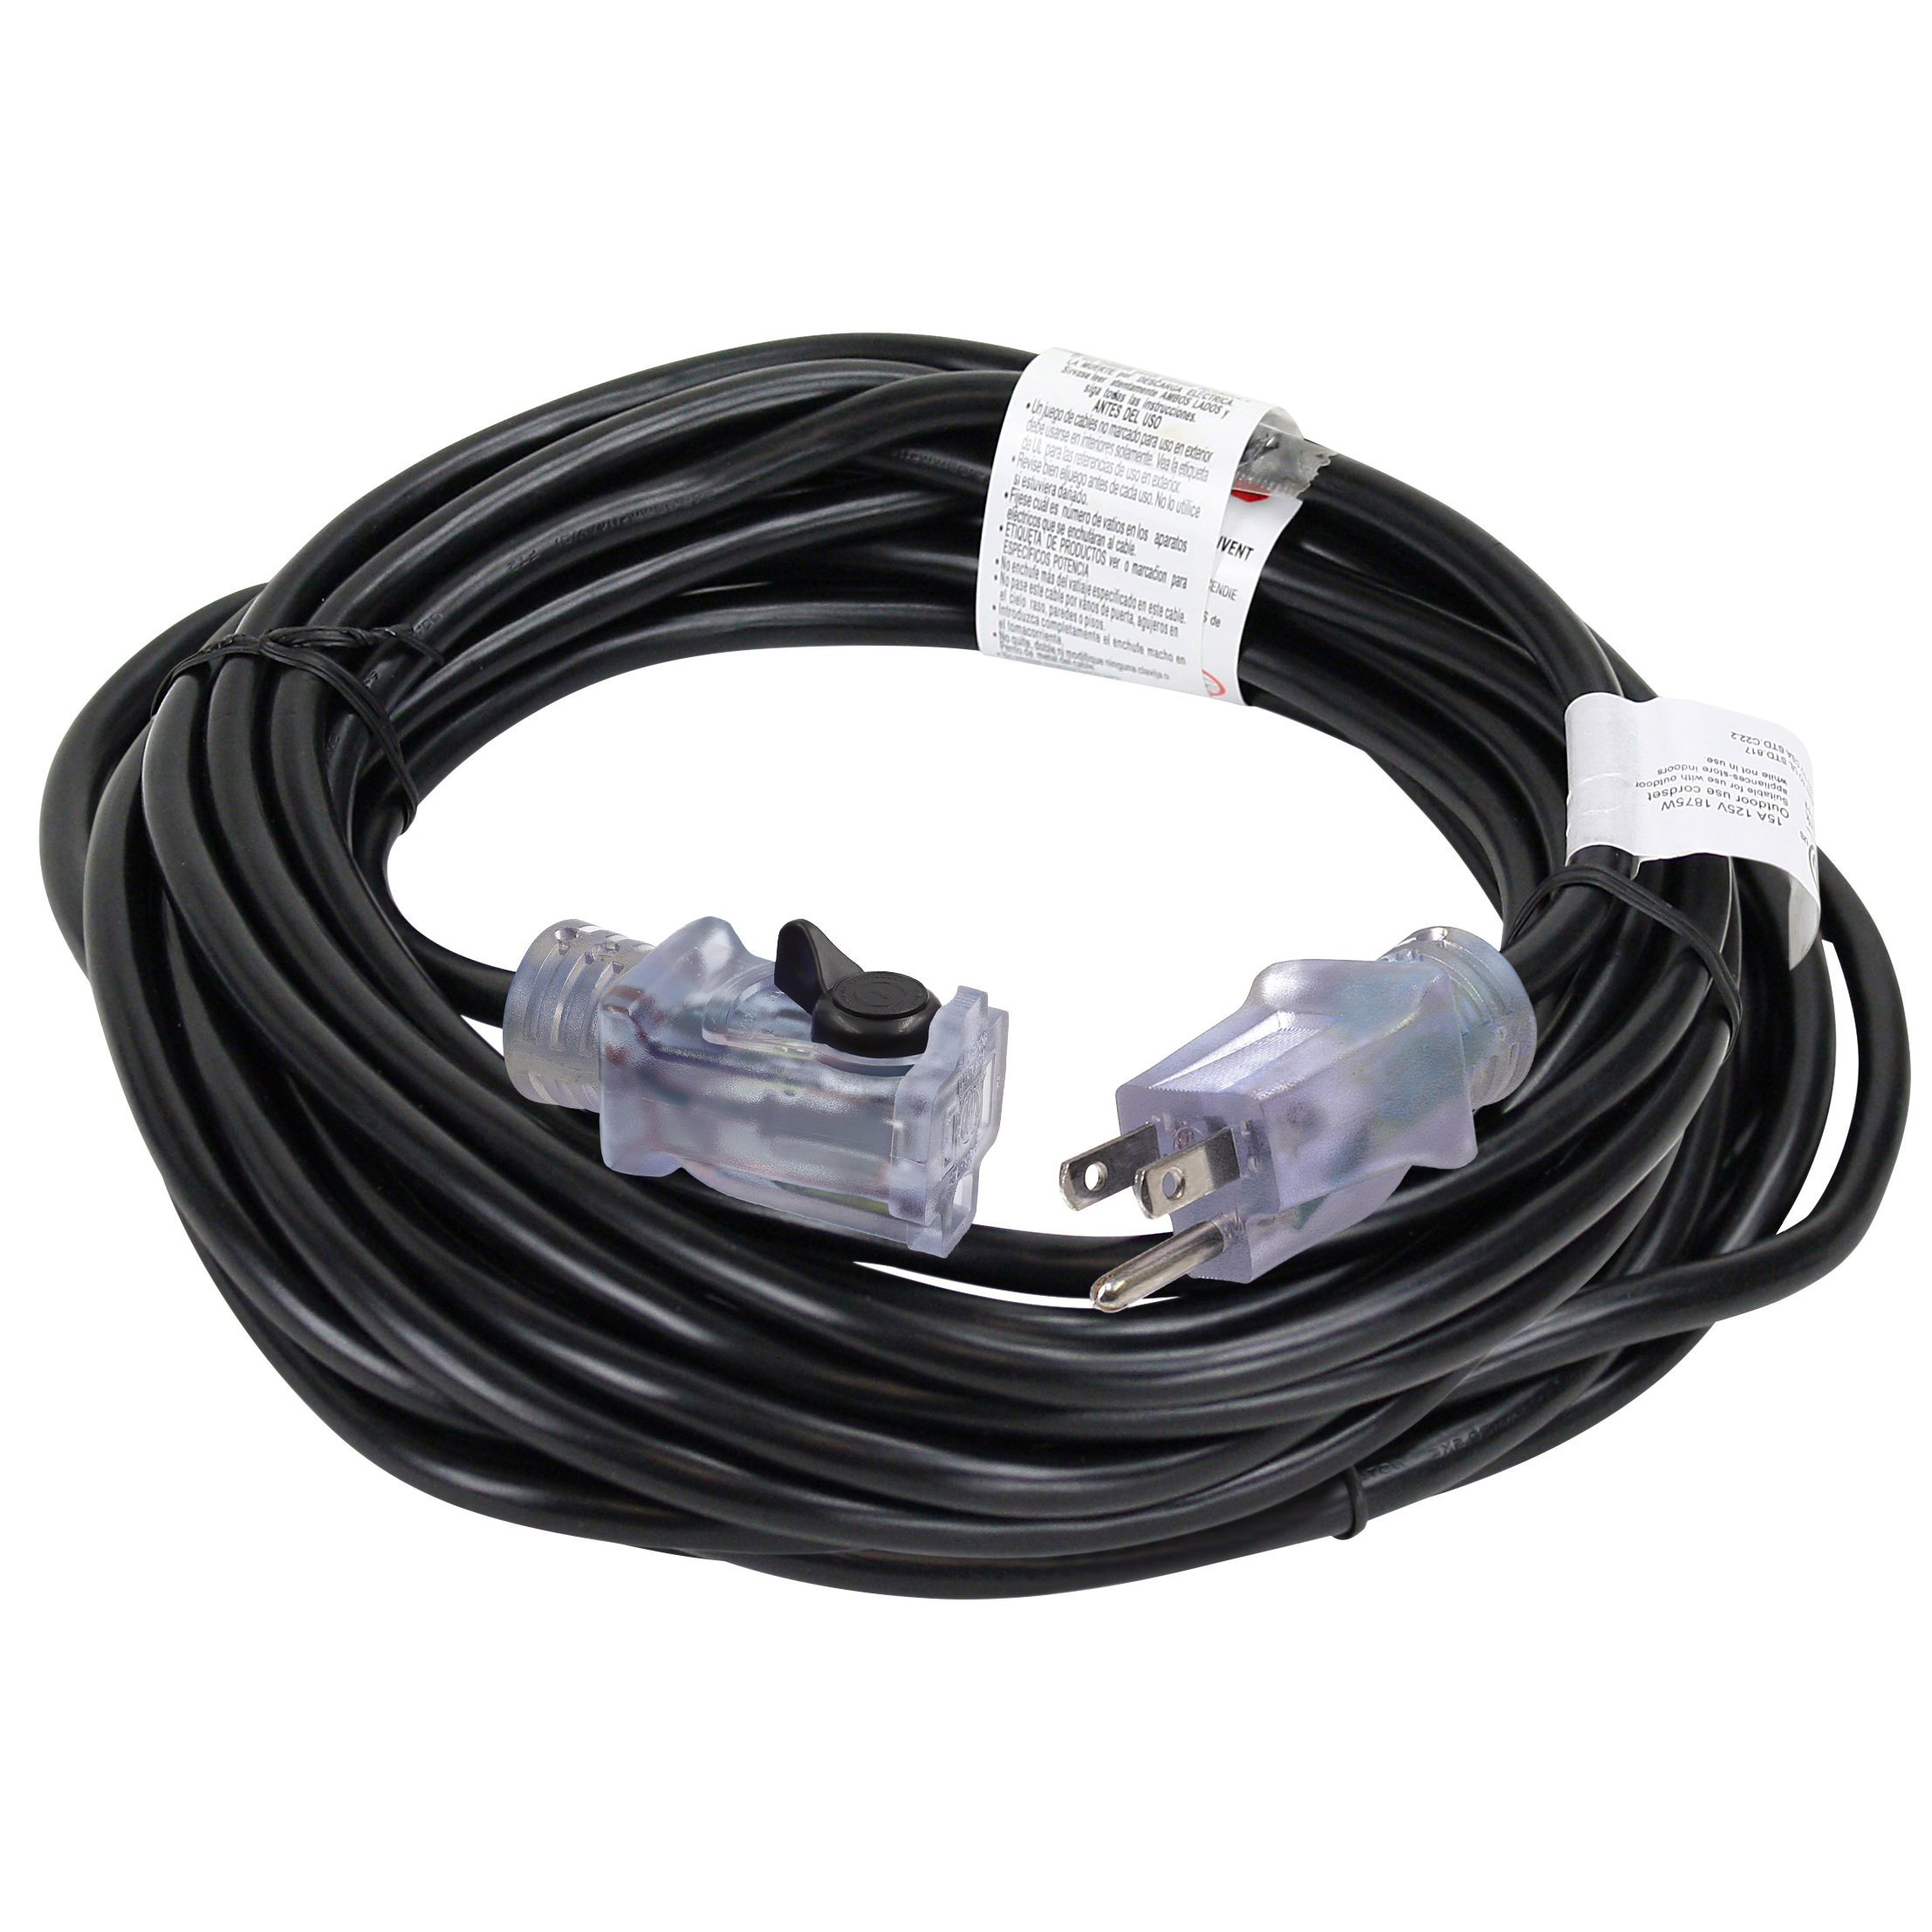 ORECPL502628 Extension Cord, 16 AWG Cable, 40 ft L, 13 A, 125 V, Black